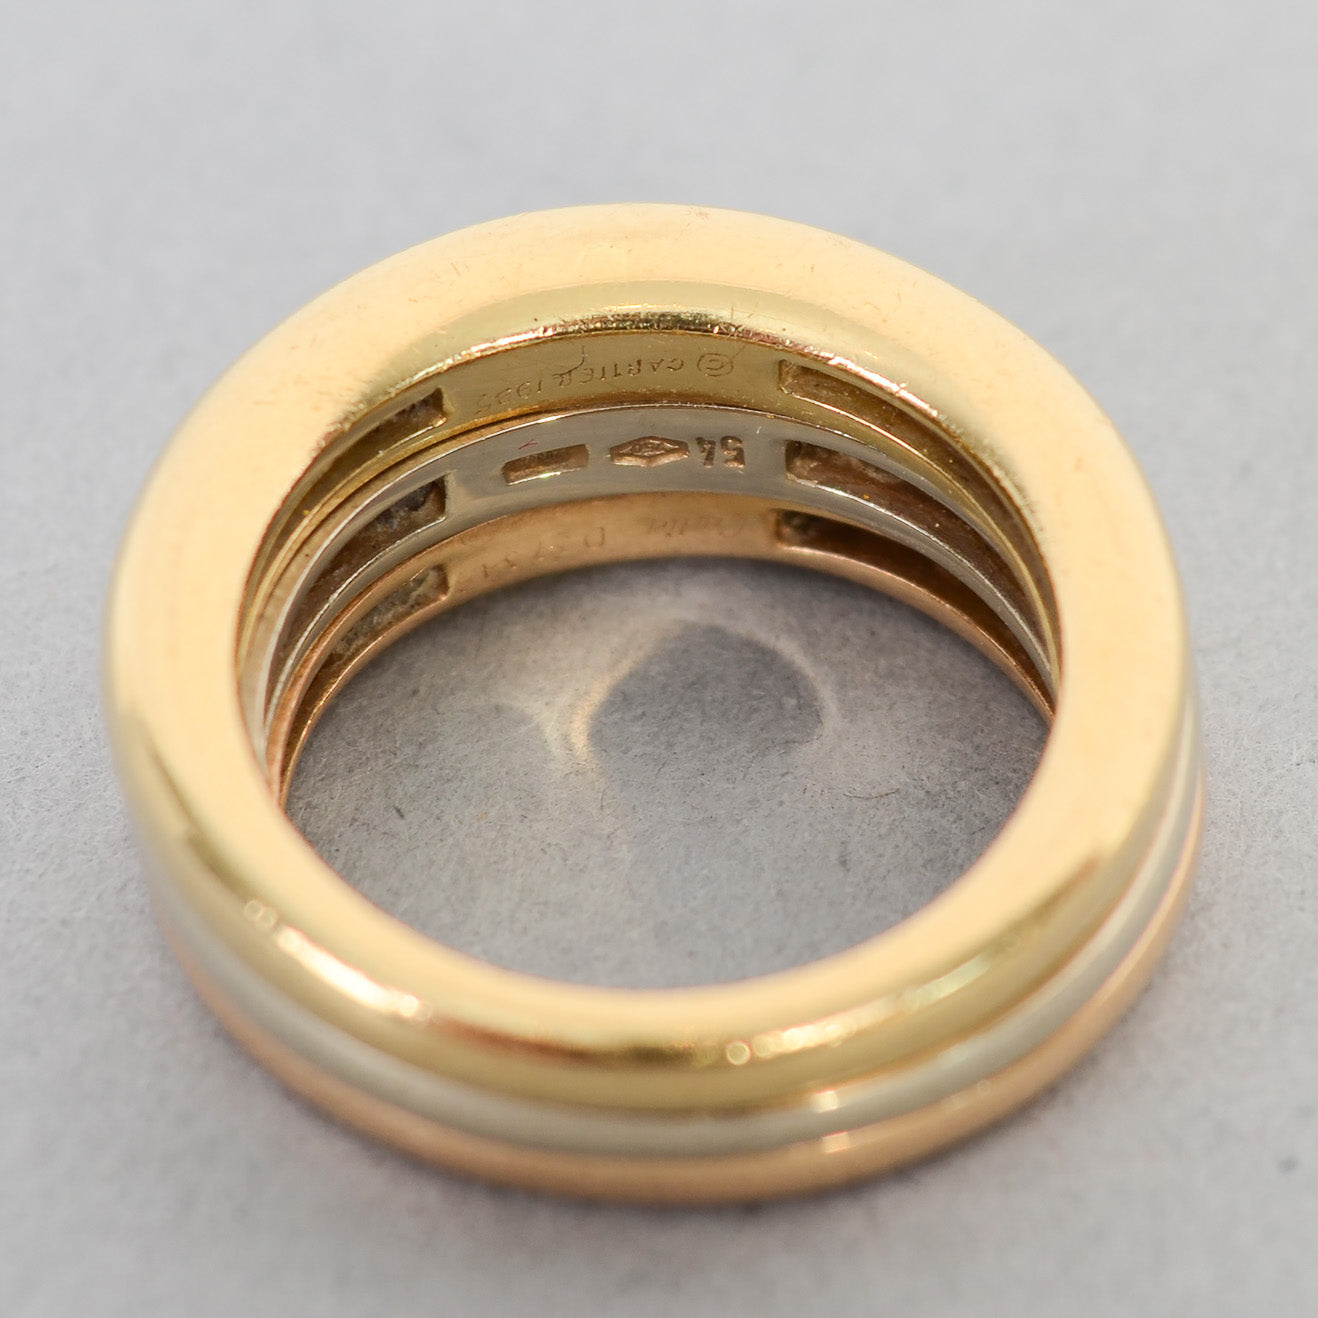 1413892-cartier-gold-stack-ring-inside